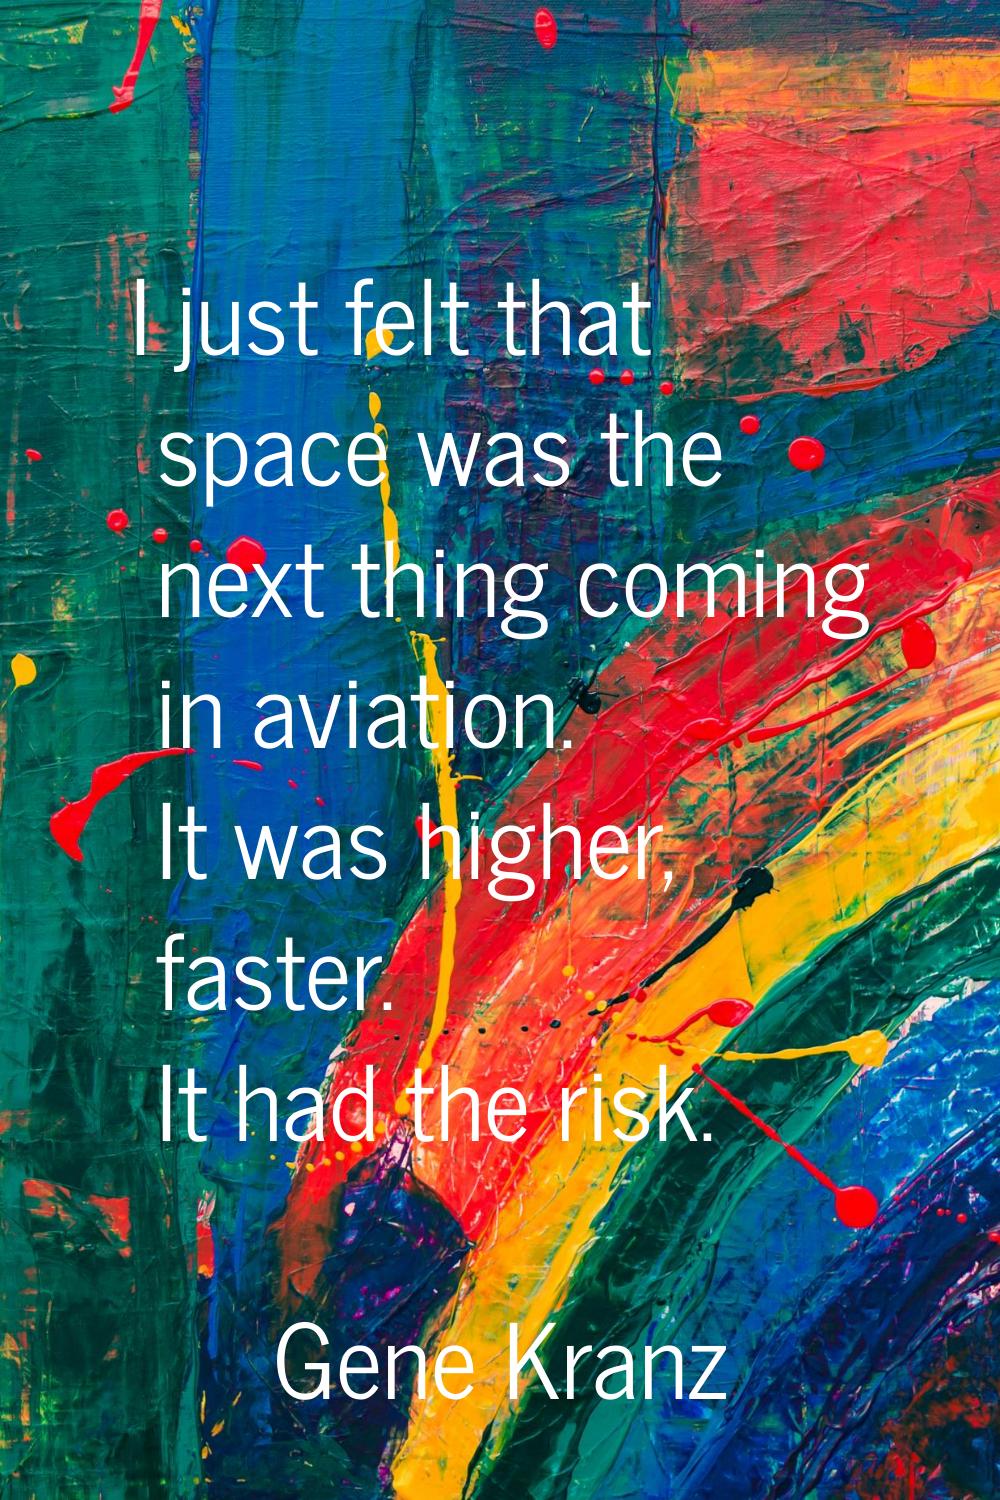 I just felt that space was the next thing coming in aviation. It was higher, faster. It had the ris